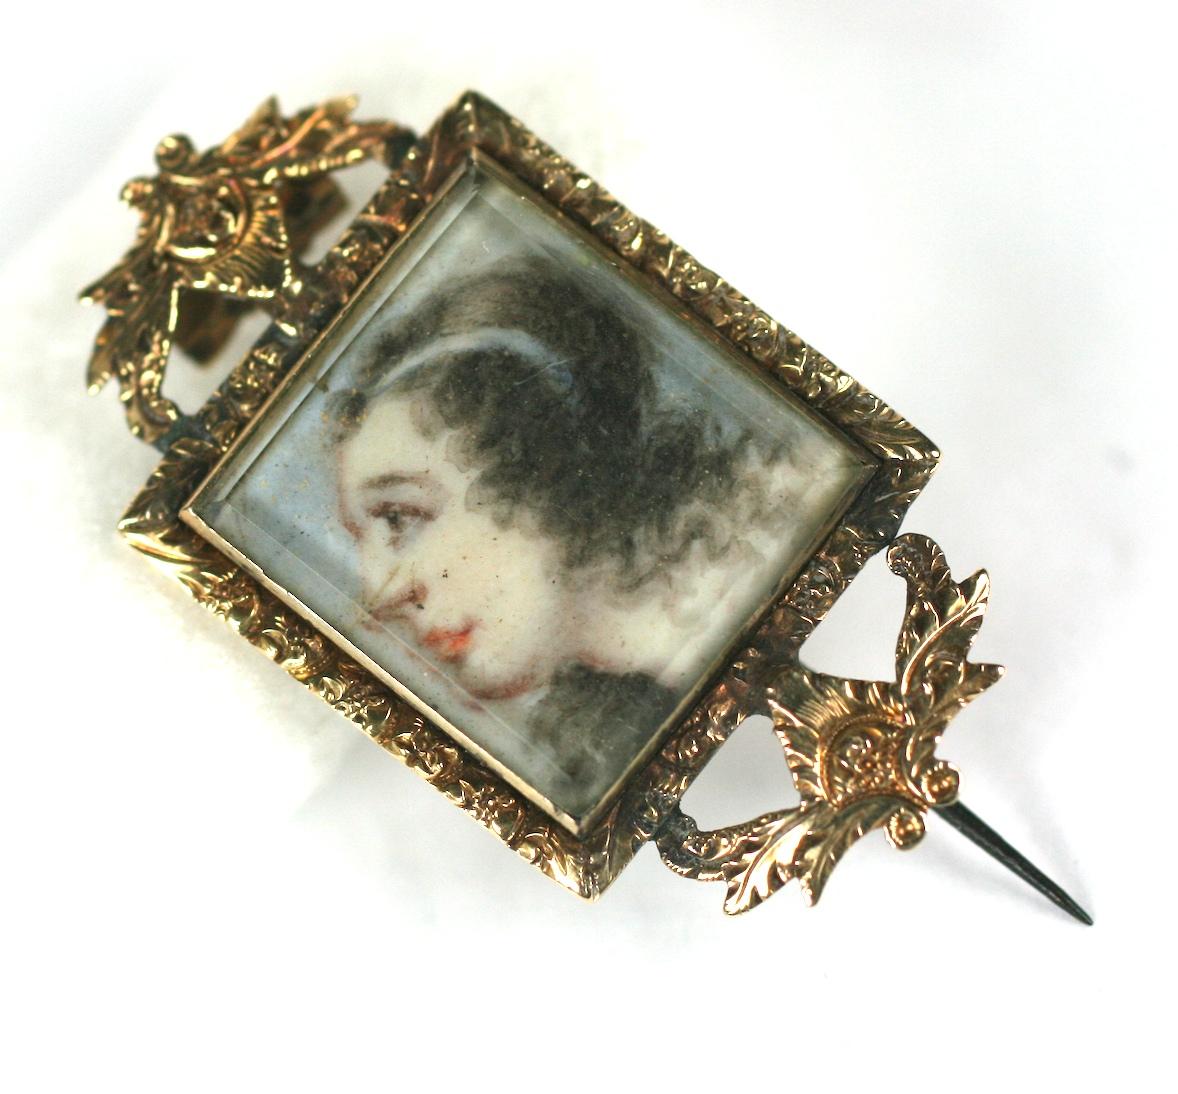 Rare Georgian Lover's Eye Brooch from the late 1700's. Painted miniature portrait of a young woman, looking upwards with white ribbon holding her hair, with a lover's eye painted on the obverse, both caught under glass panes. 
The unknown young